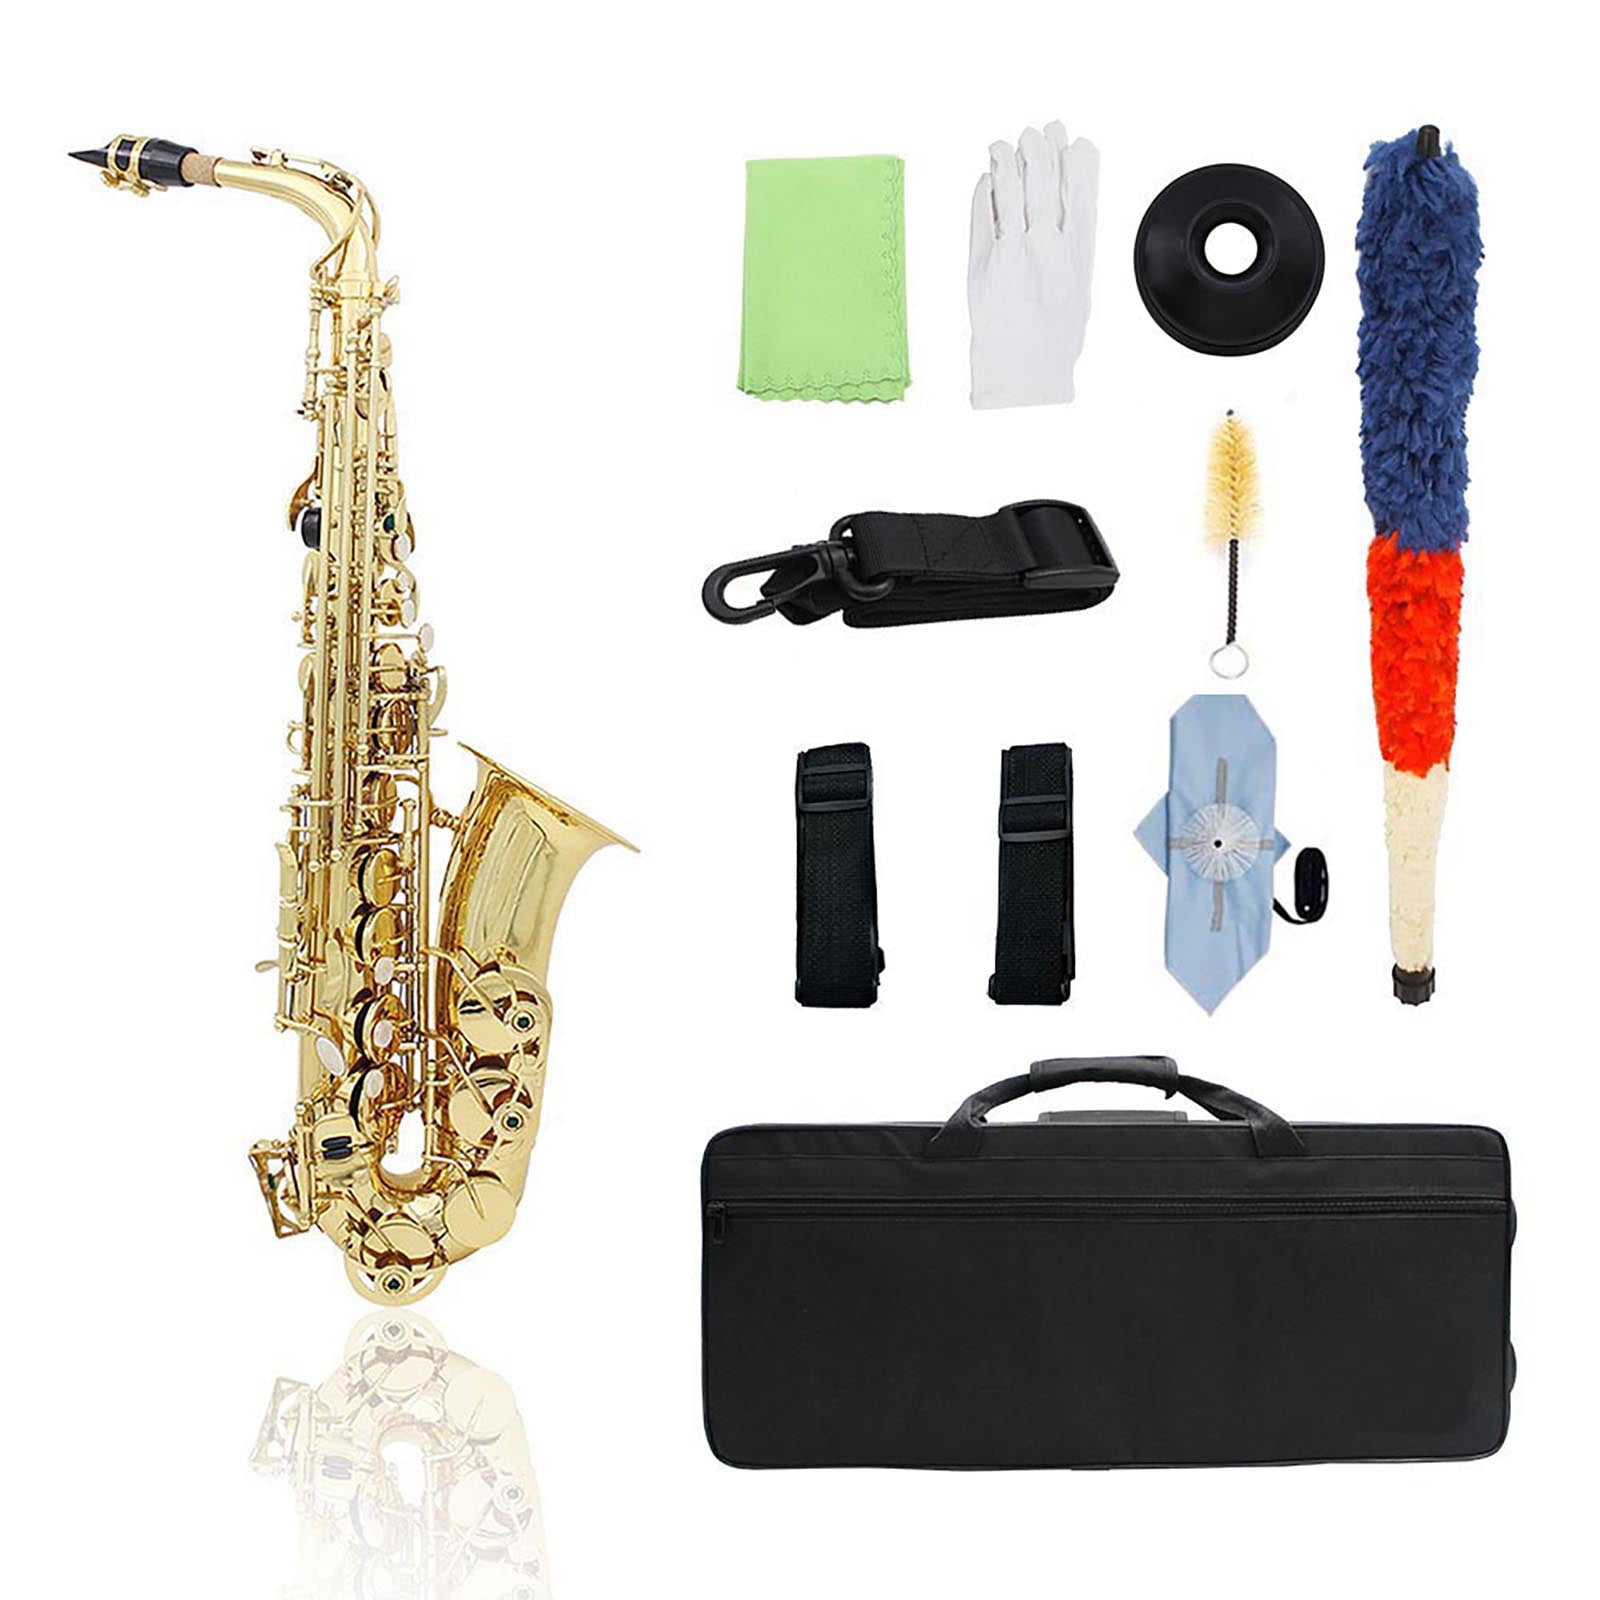 Brass Alto Saxophone Sax Bend Neck with Clean Cloth Cork Grease 